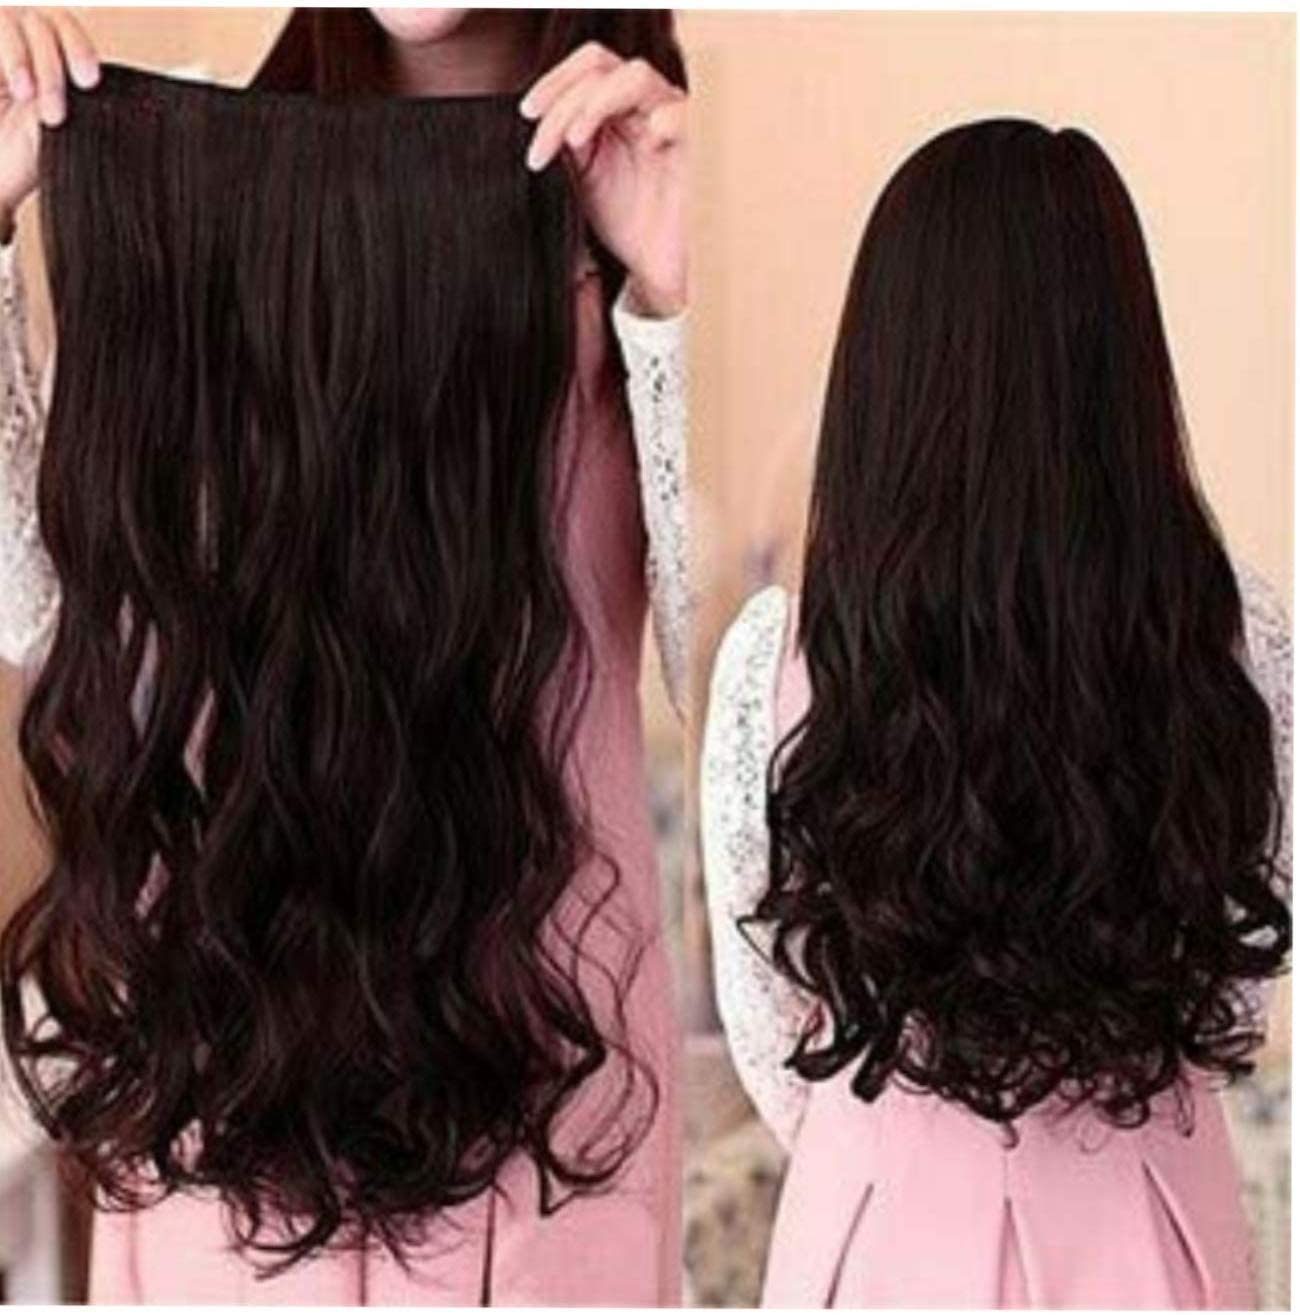 Lamansh Synthetic Hair Black / 24 inch / Curly Lamansh™ Black Curly Clip in Hair Extensions For Girls